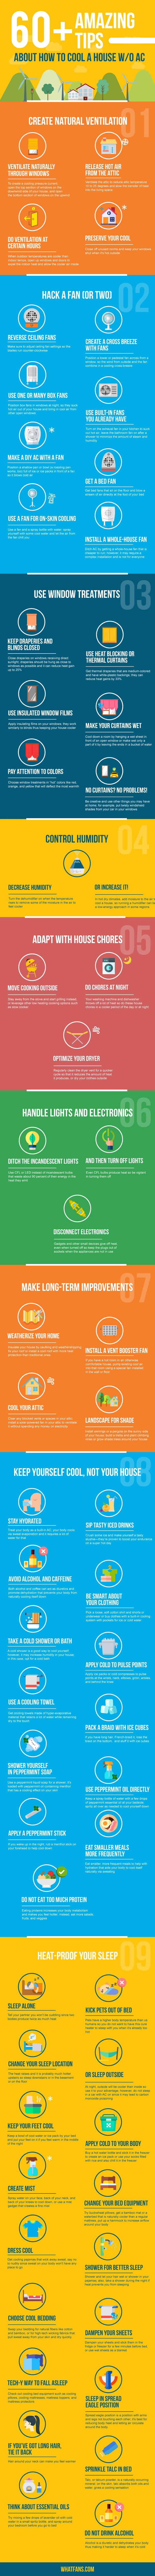 60+ amazing tips about how to cool a house or room without air conditioner infographic #fan #fans #whatfans #energysaving #savingmoney #summertips #naturalVentilation #diy #attic #airconditioning #Infographic